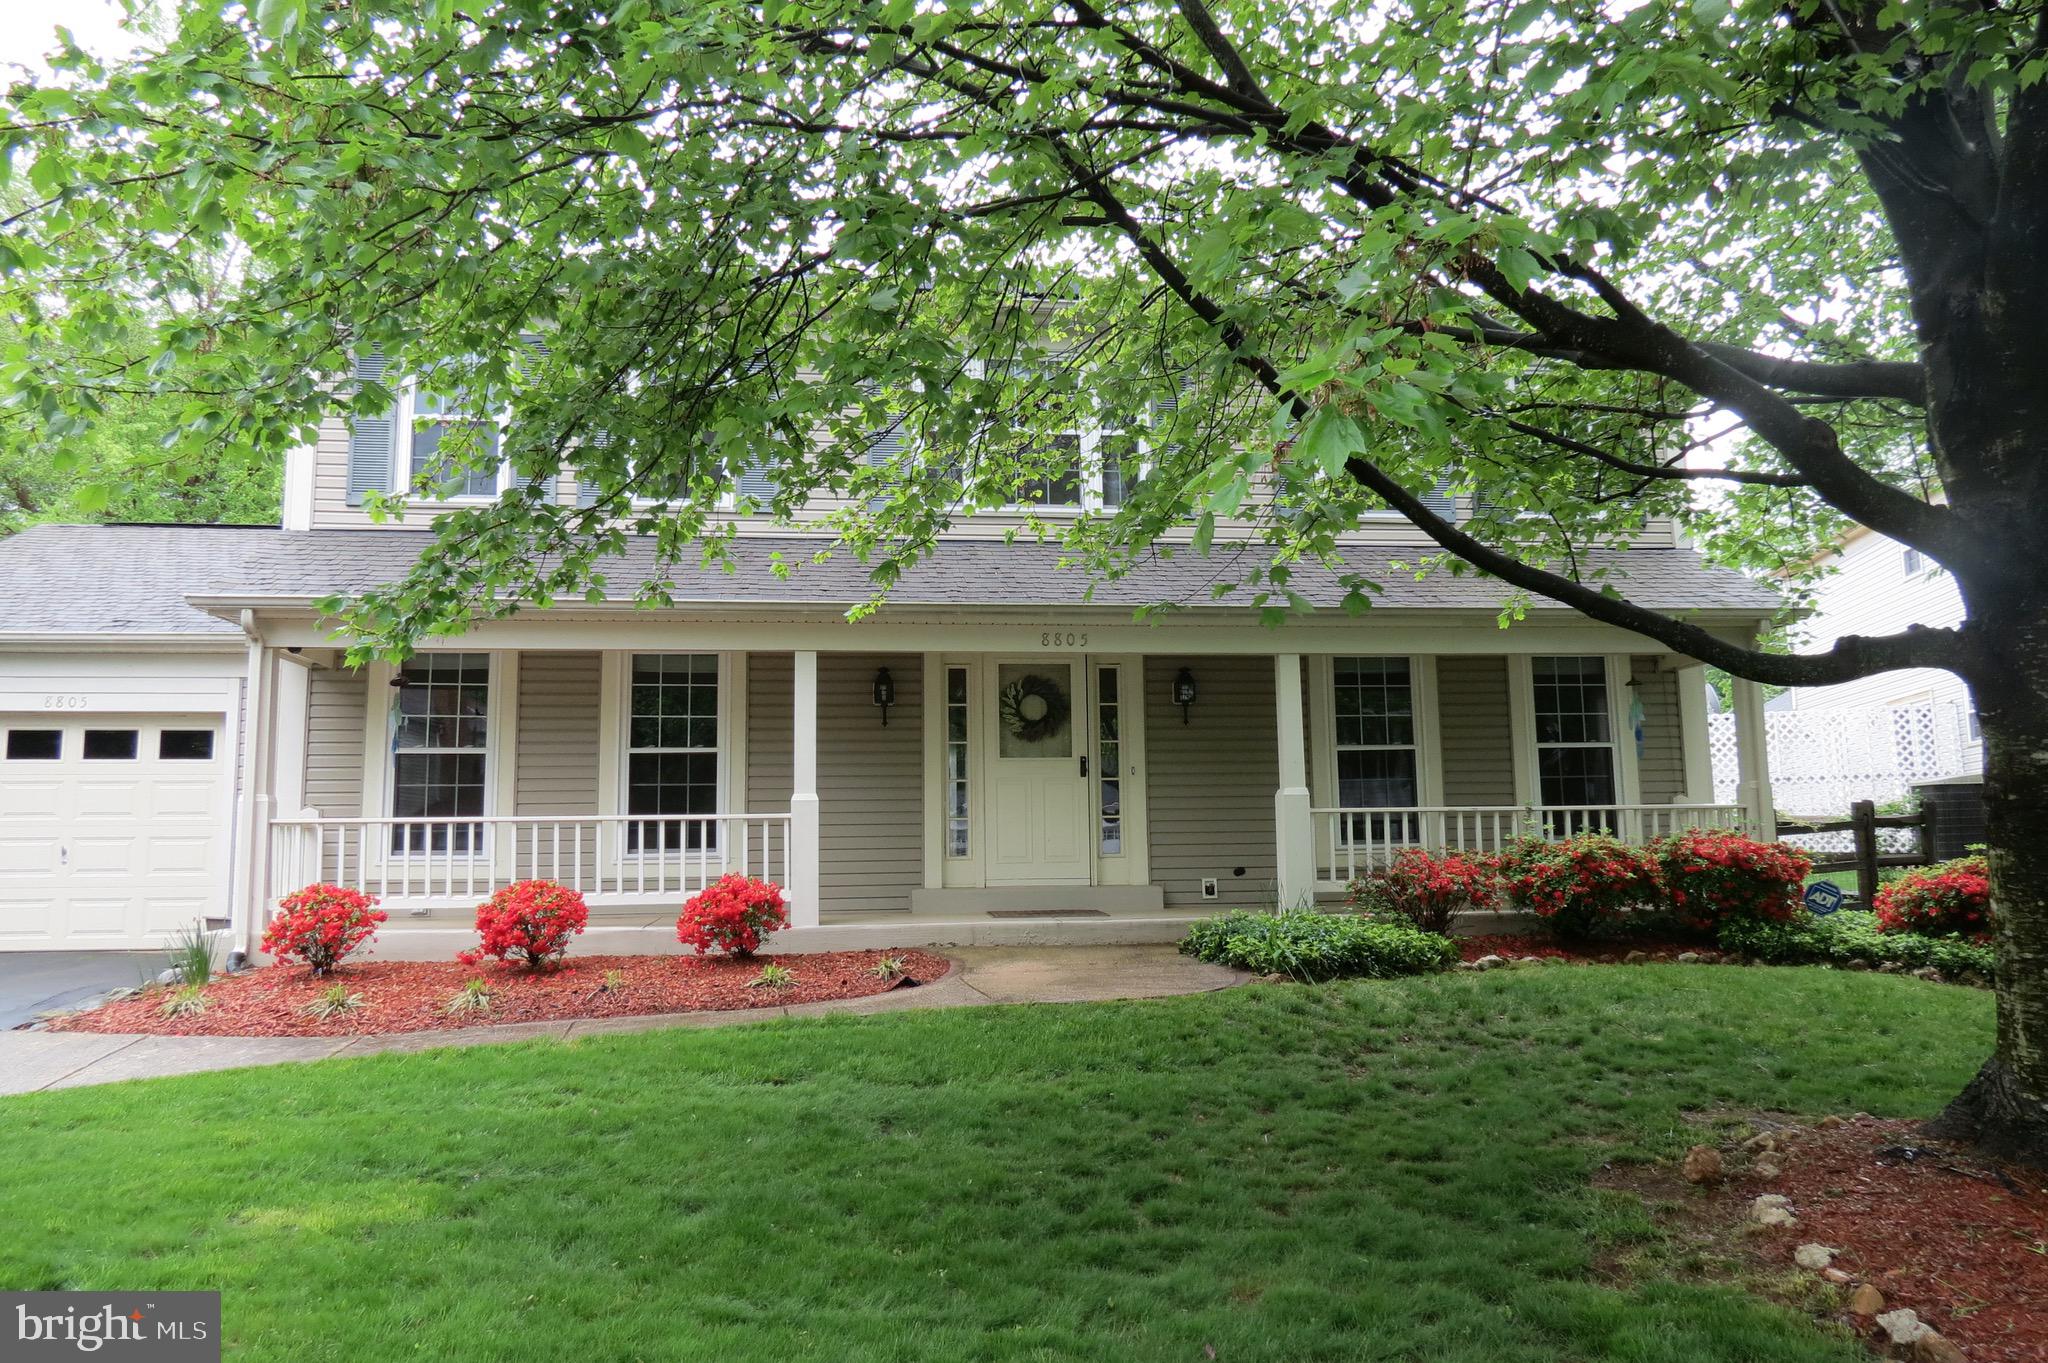 a front view of a house with a garden and porch